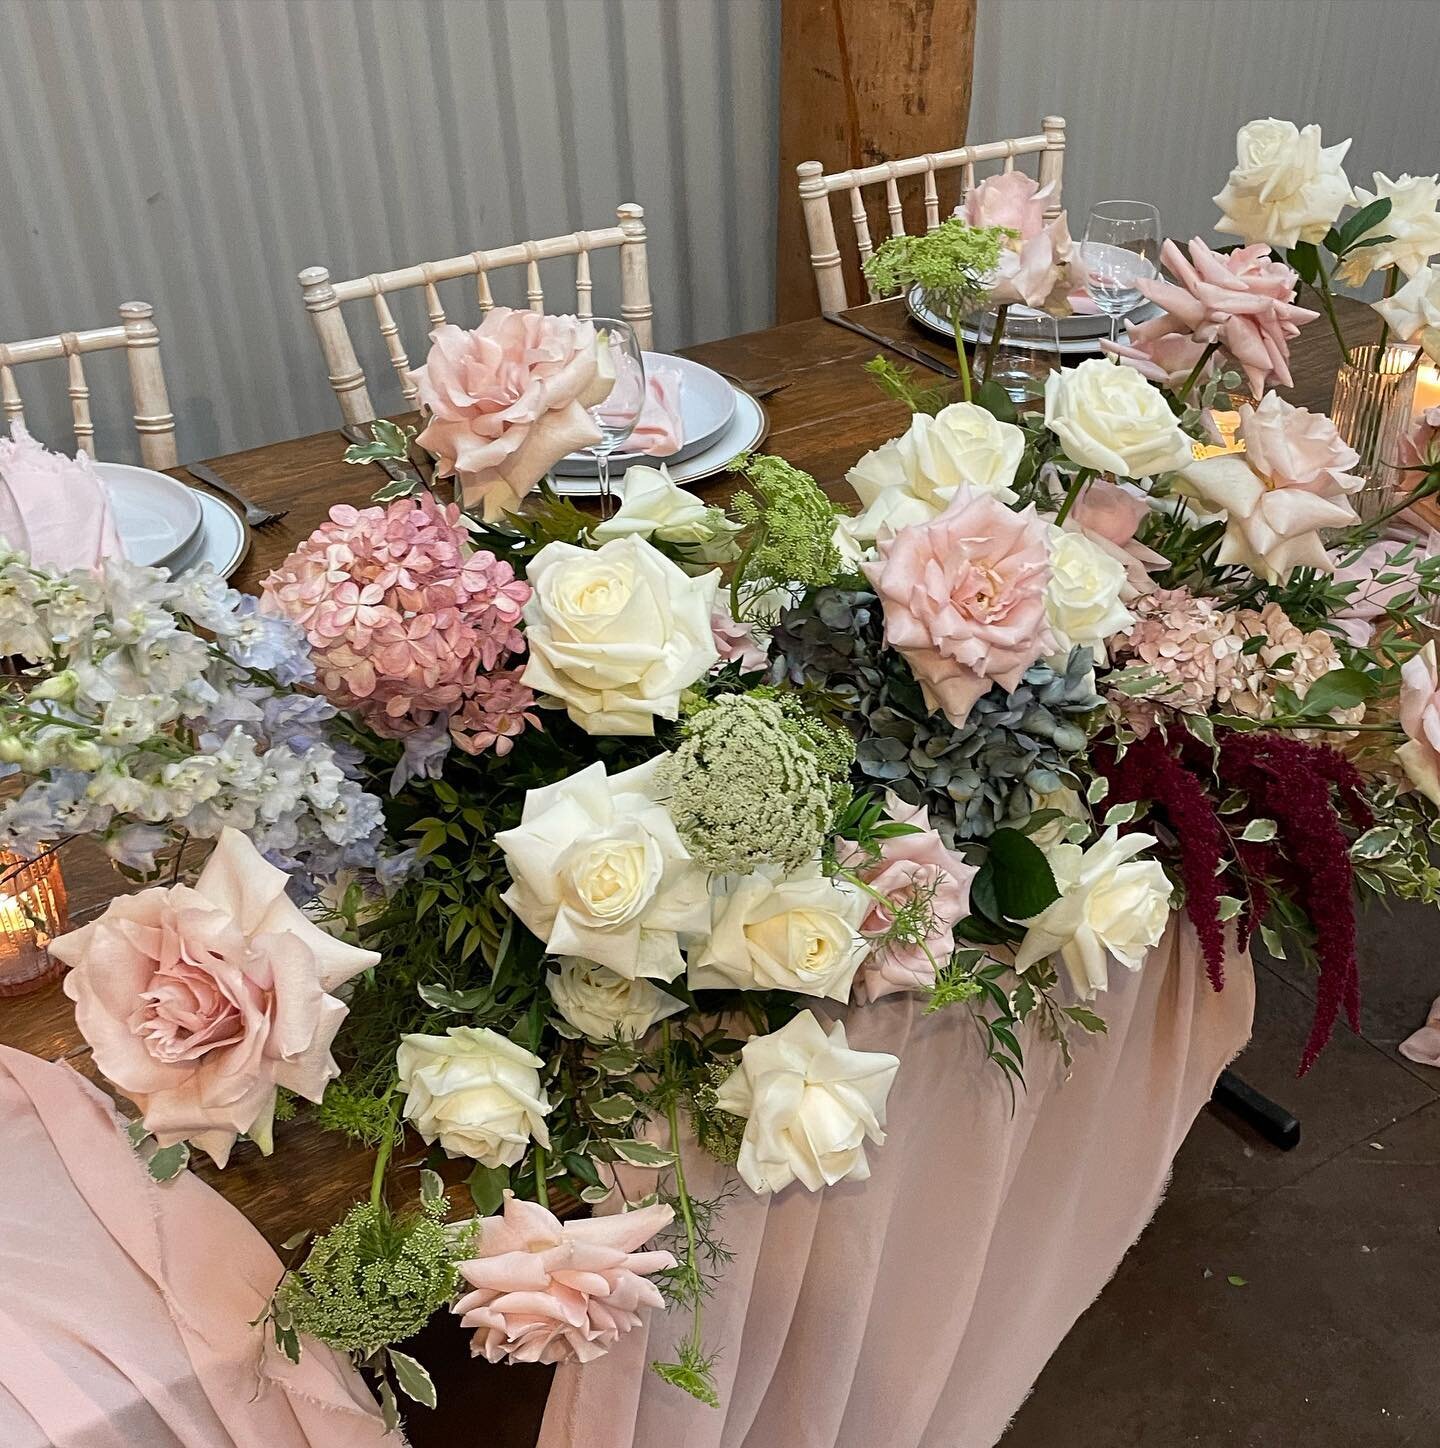 Long &amp; Low garden style tablescapes, filled with abundant roses and seasonal pretties.
We love these for your bridal table. Let's get planning, fill in our form at www.darlingevents.com.au #weddings #sydneyweddings #floraldesign #eventstylist #fl